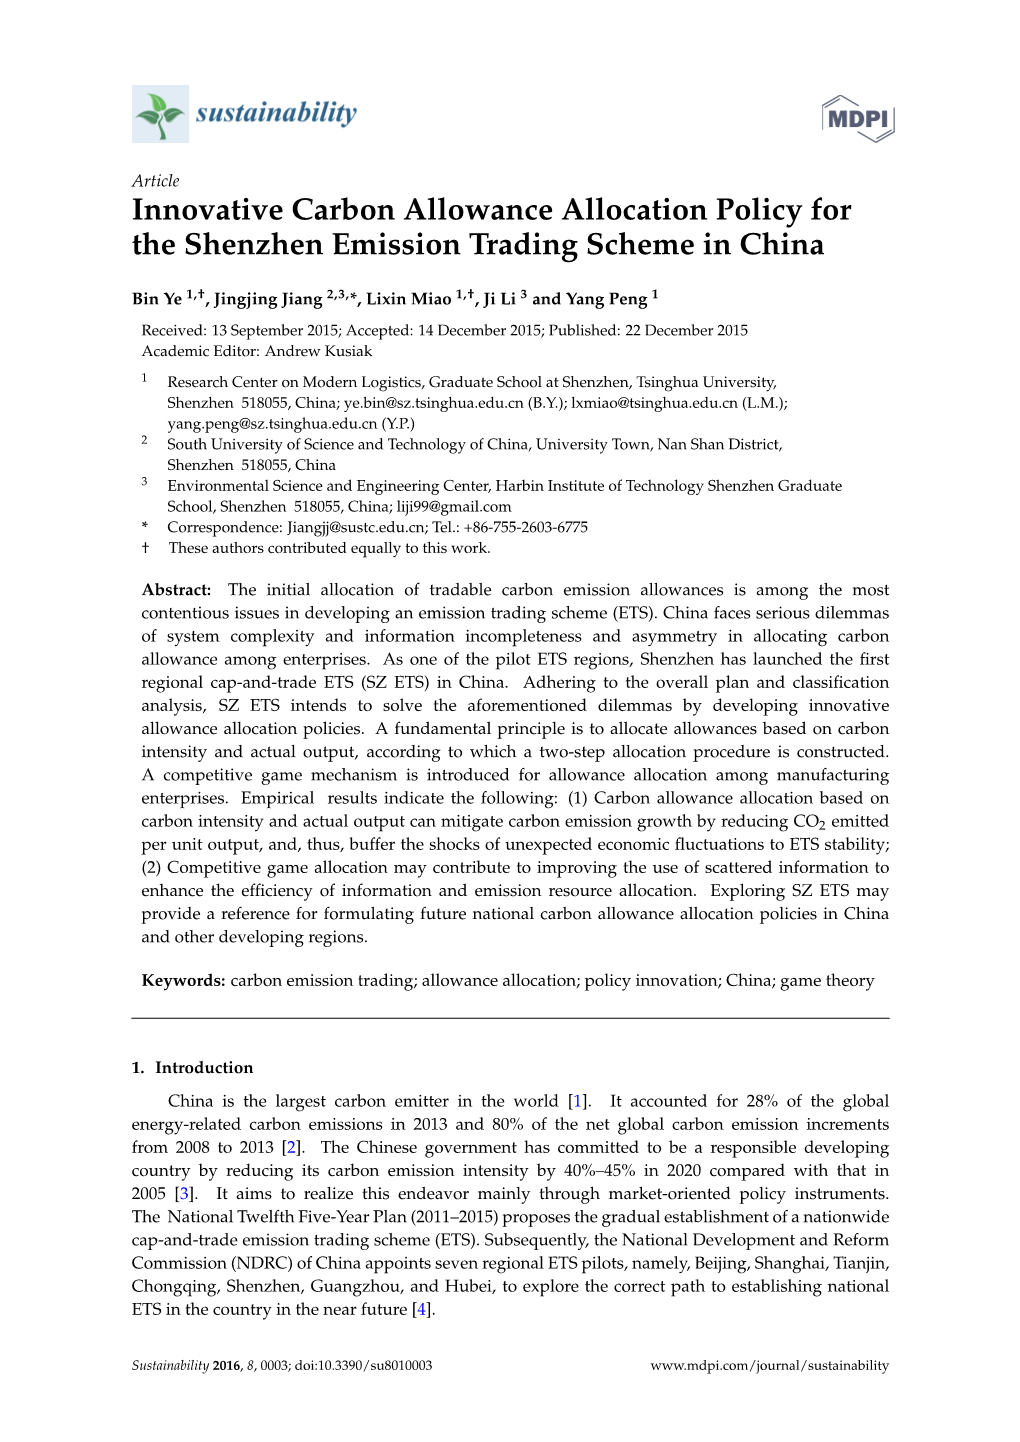 Innovative Carbon Allowance Allocation Policy for the Shenzhen Emission Trading Scheme in China